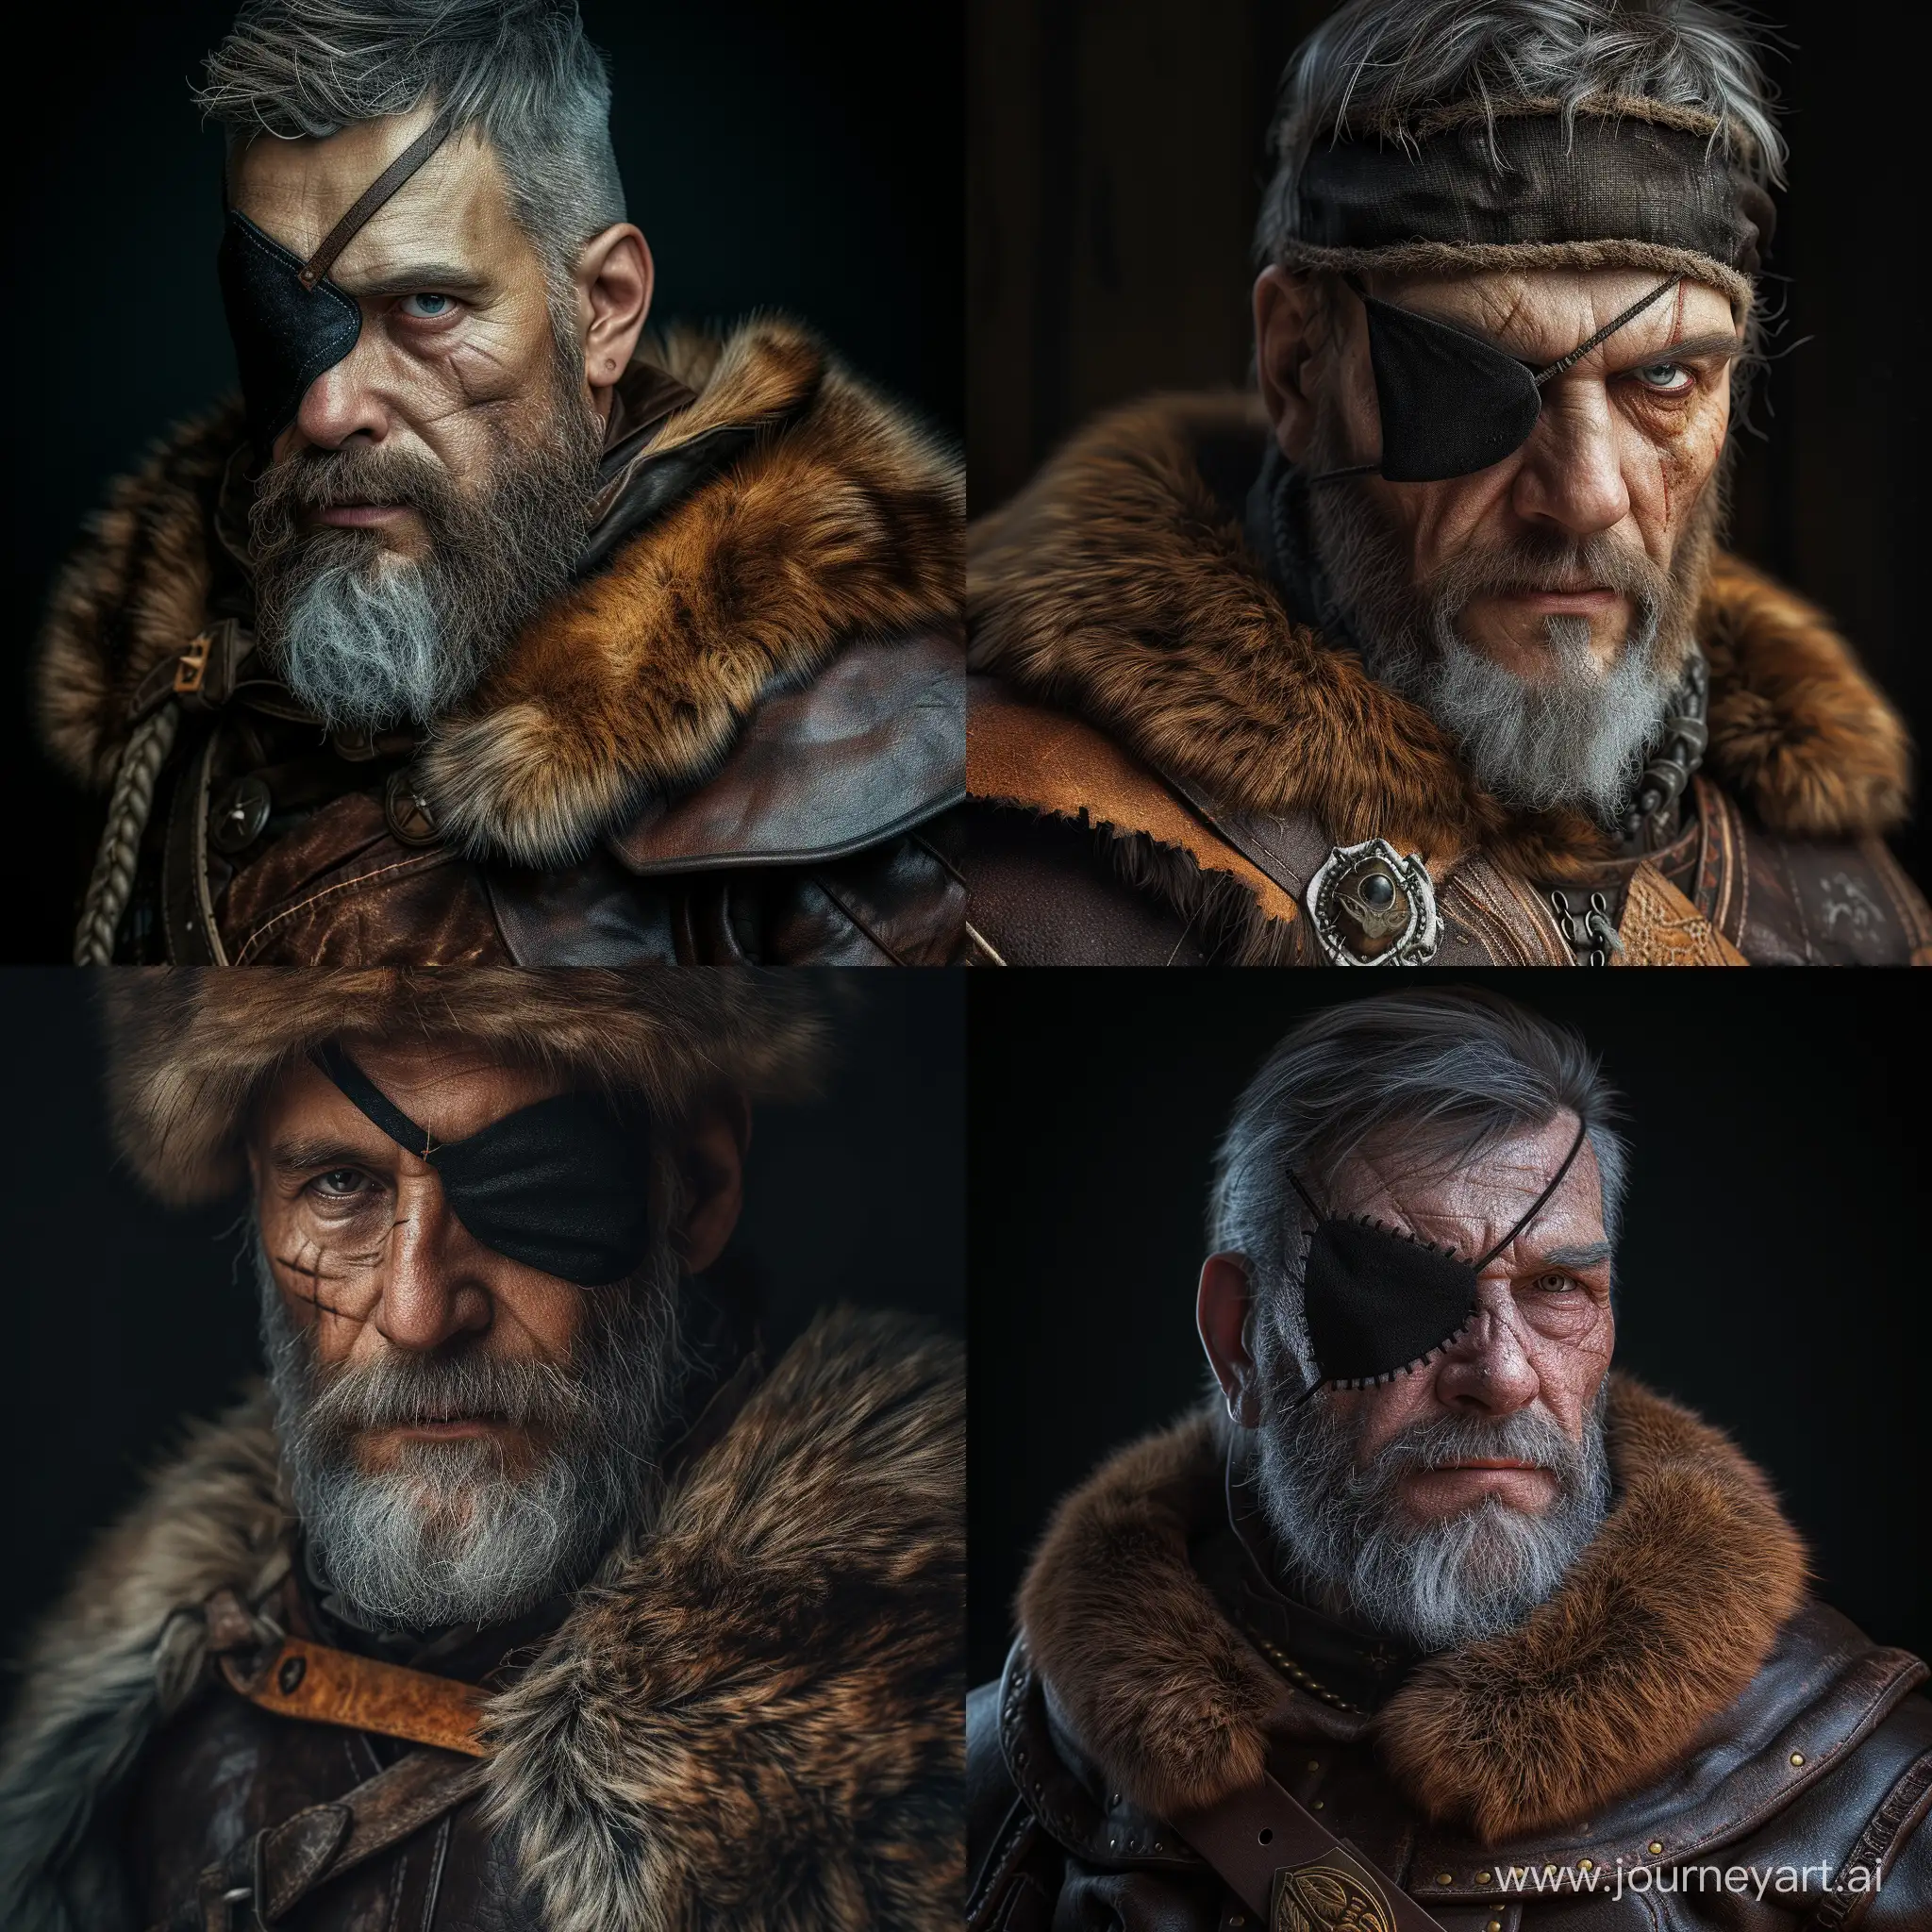 Medieval Czech Warlord Jan Zizka, Grizzled Beard, Thinning Gray Hair, his one eye is hidden with a black cloth eyepatch, wearing a leather tunic with fur collar, fur hat cinematic shots, realistic, 4k, photo realistic, cinematic lighting